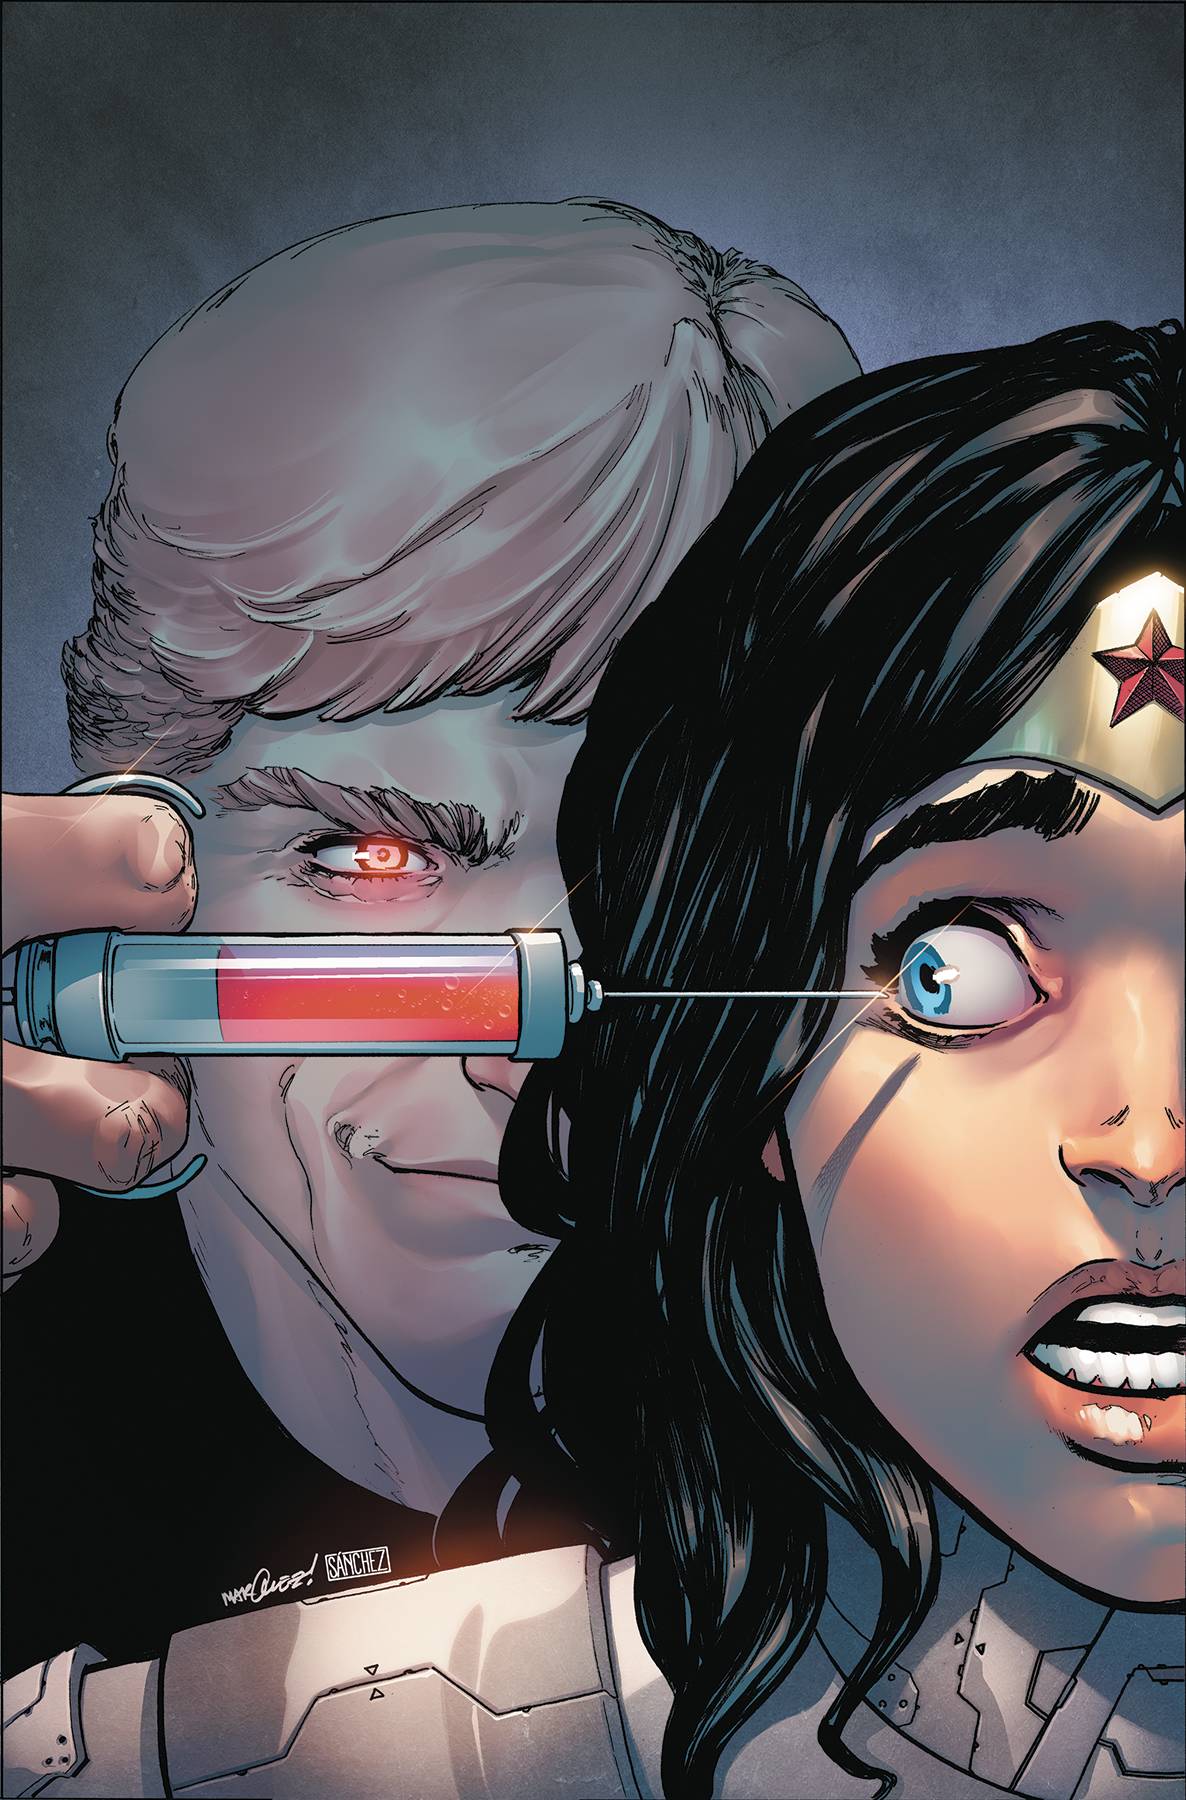 WONDER WOMAN #761 | Game Master's Emporium (The New GME)